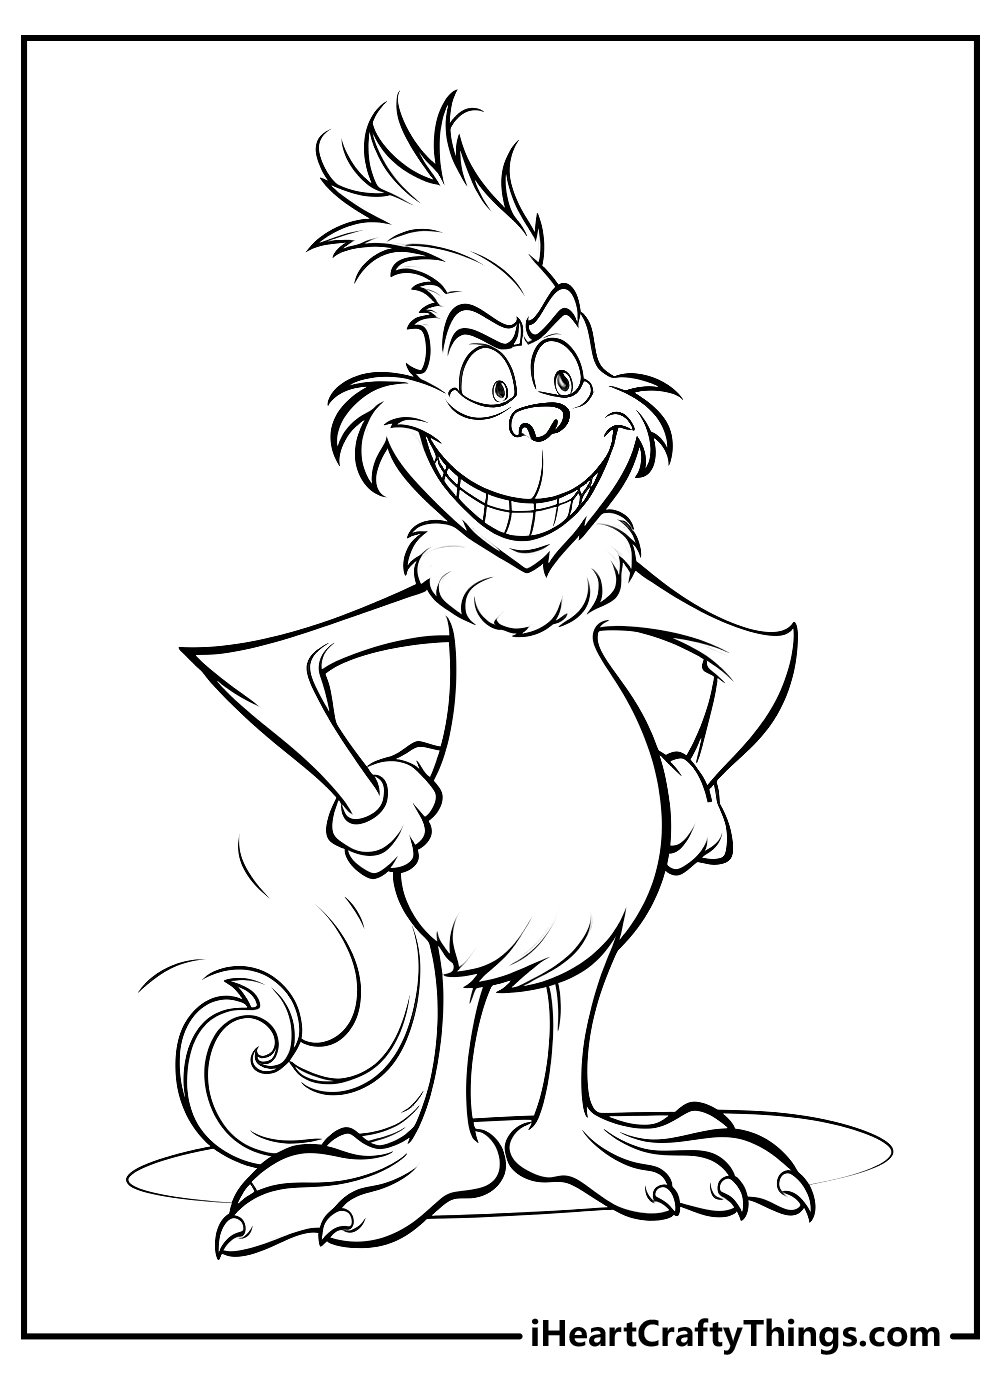 Grinch coloring pages for kids